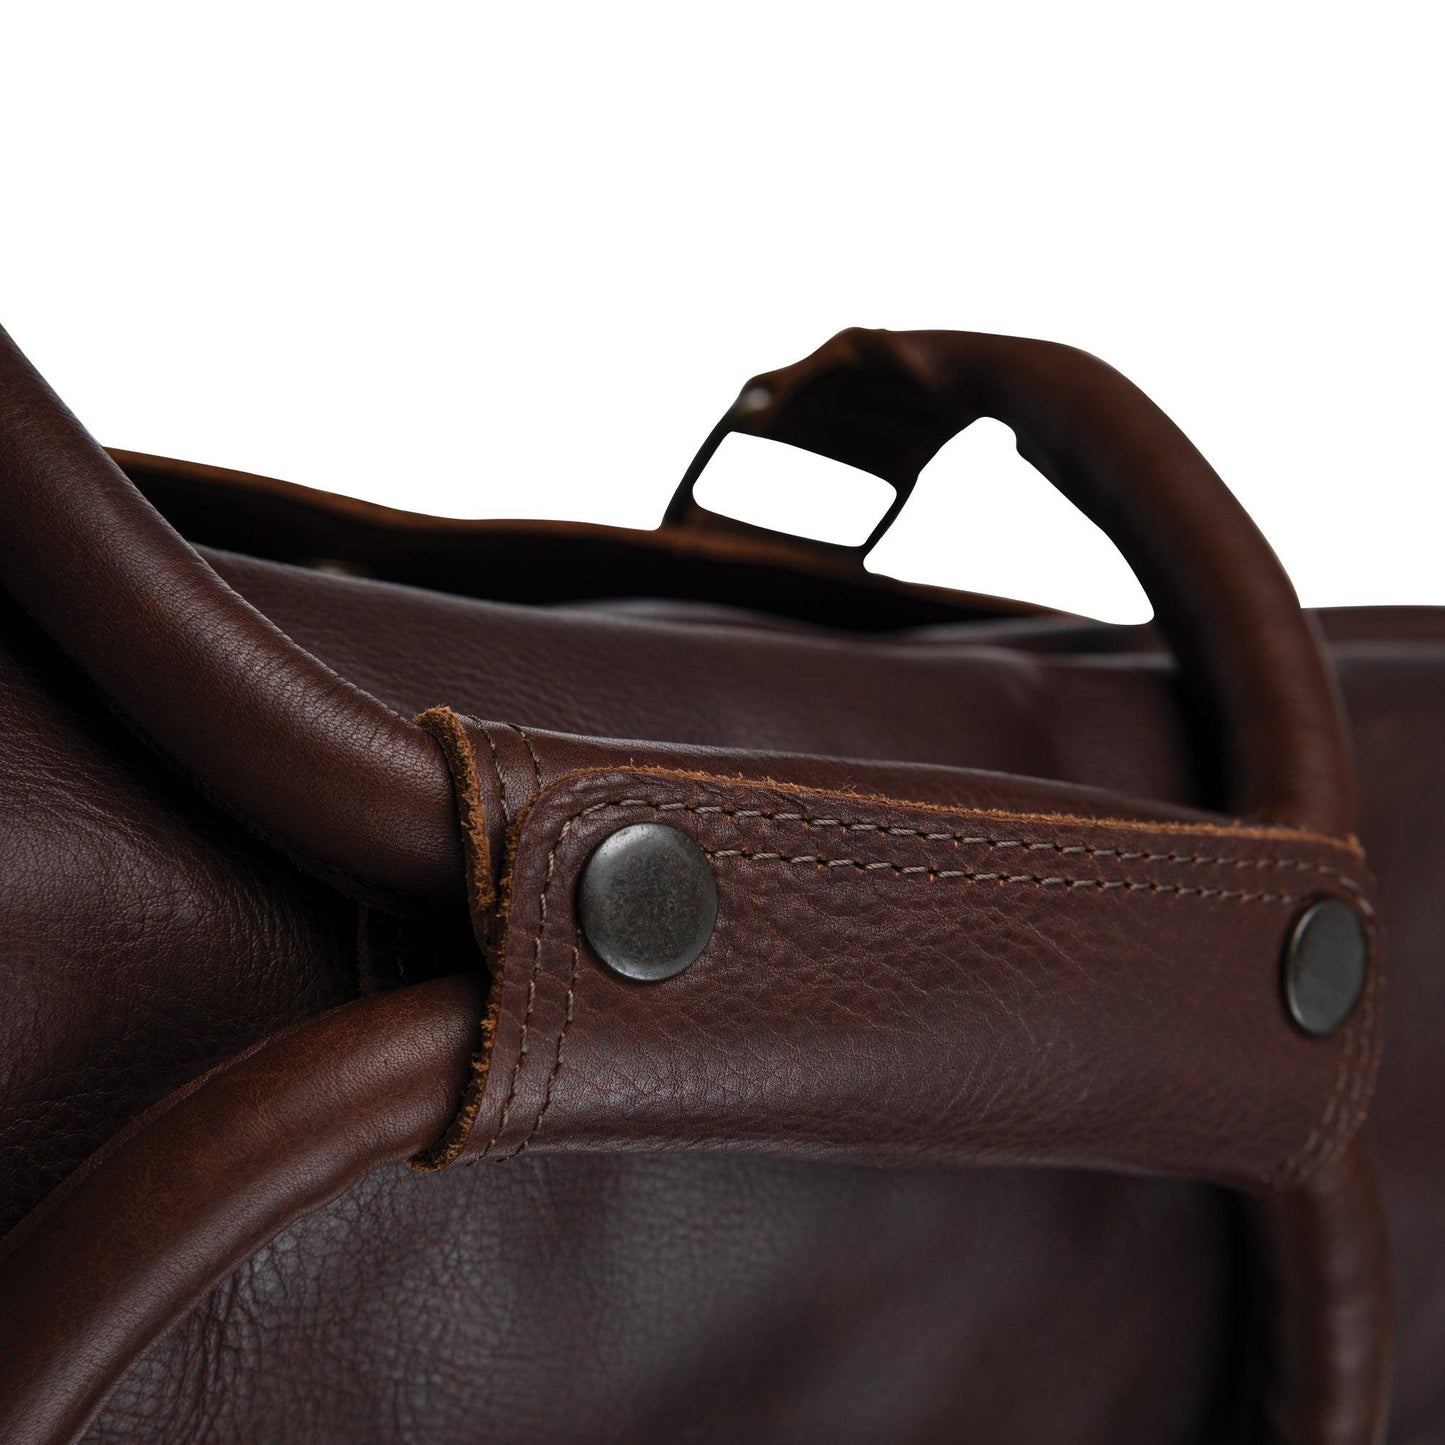 Leather Briefcase - Onward Reserve